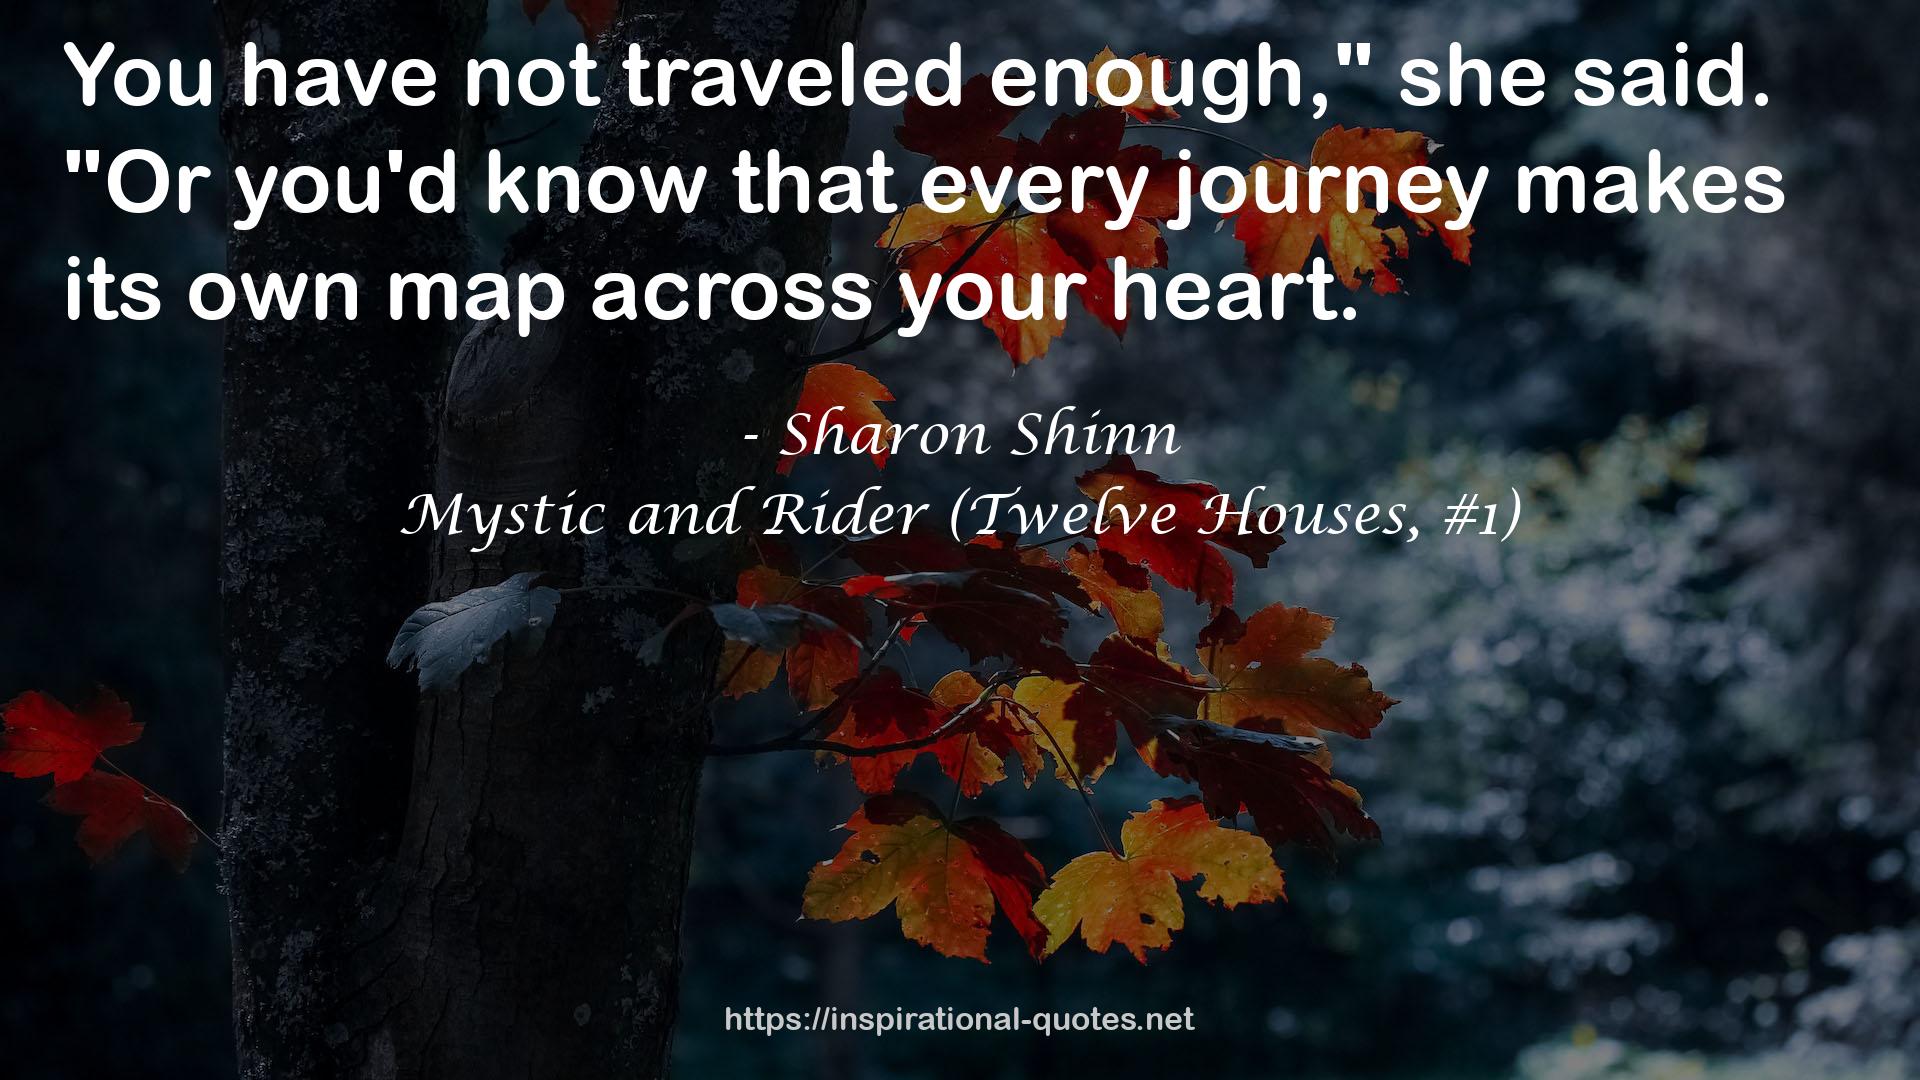 Mystic and Rider (Twelve Houses, #1) QUOTES